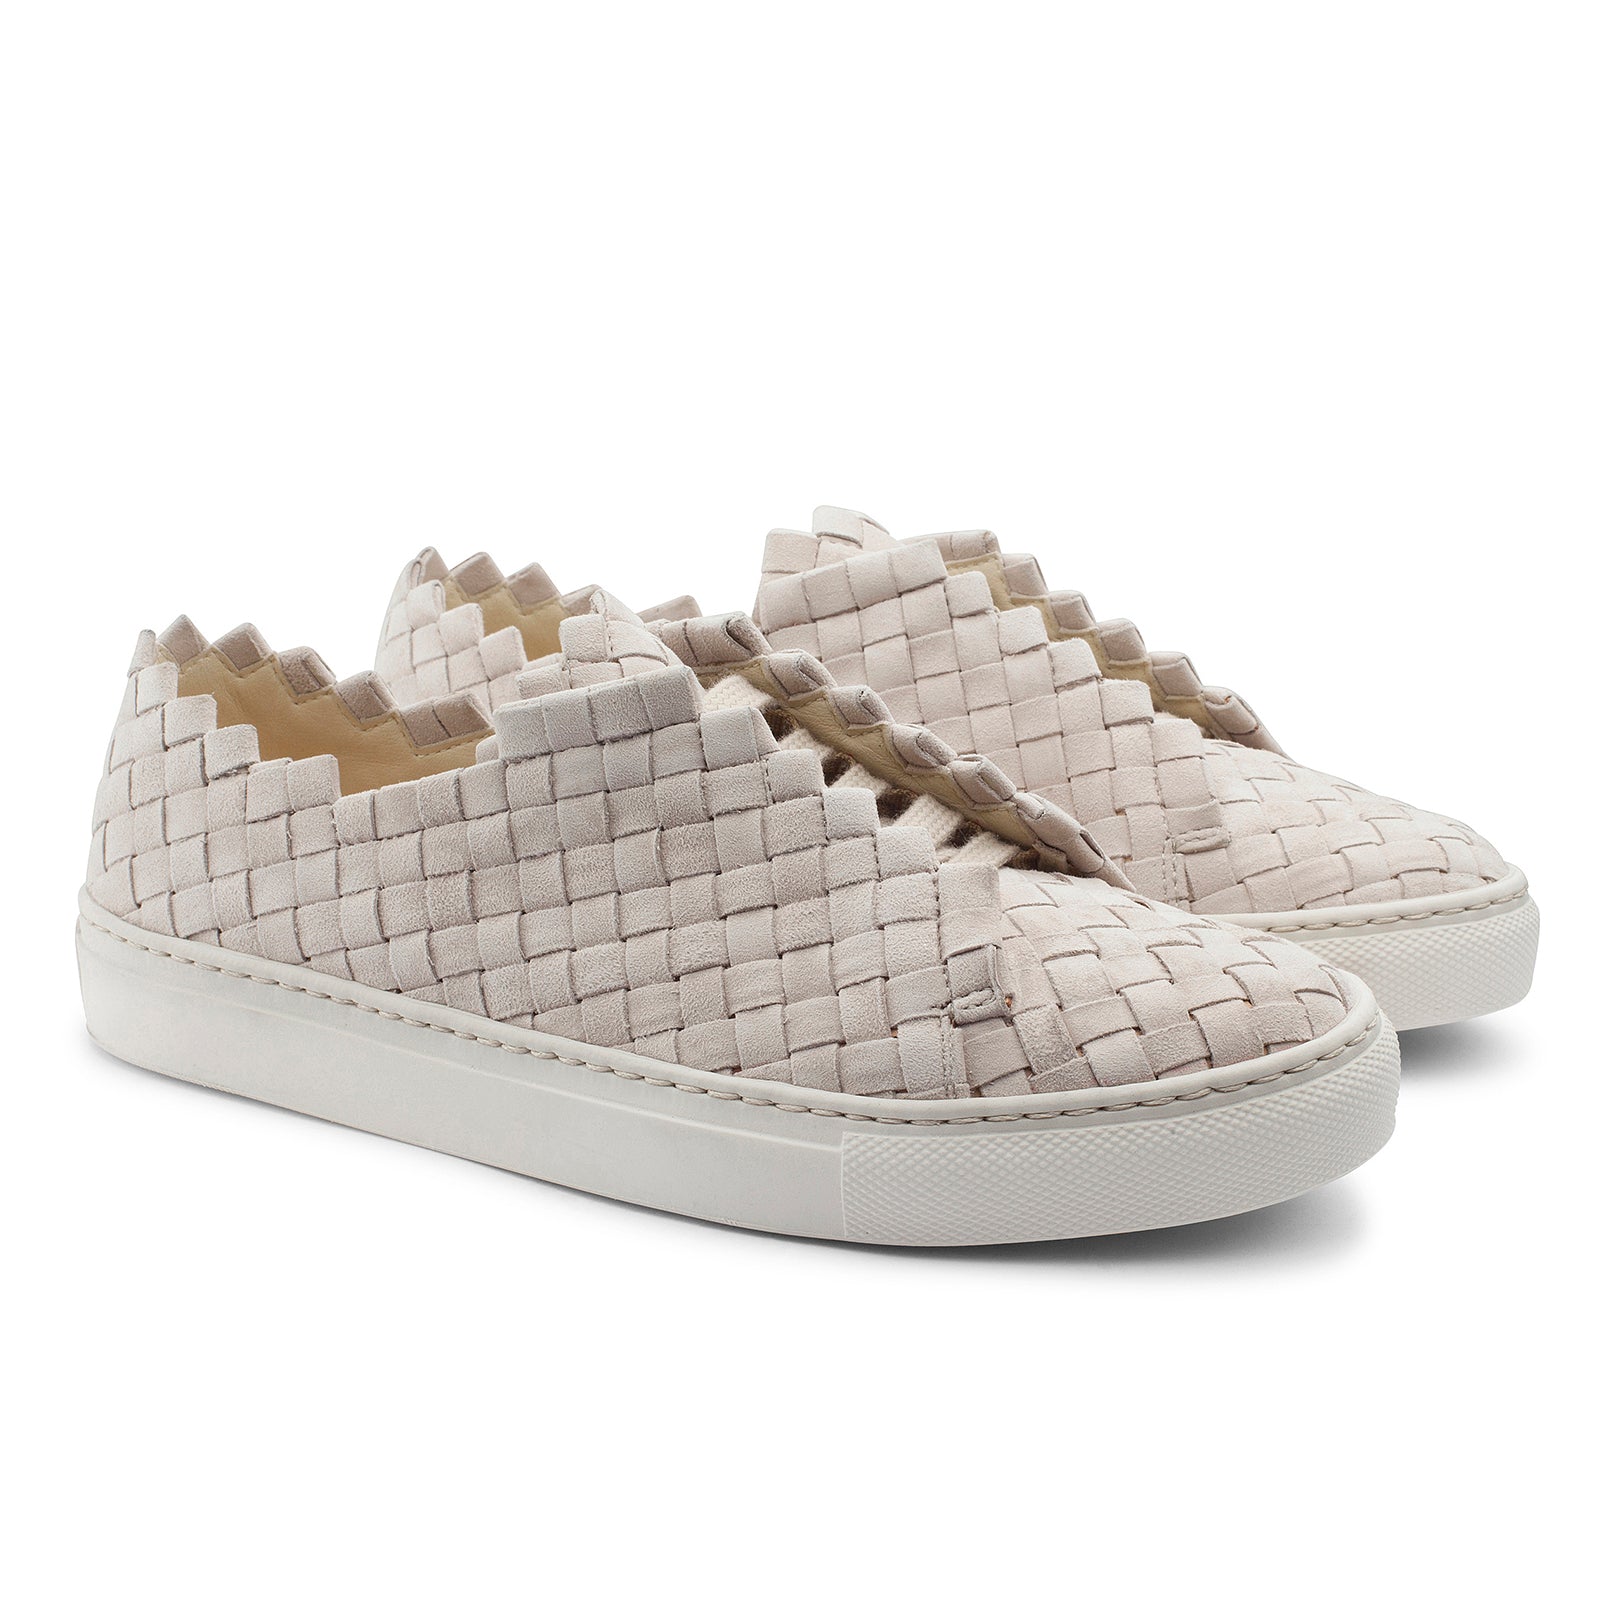 The Woven Sneaker Suede, Woven Womens - MILANER